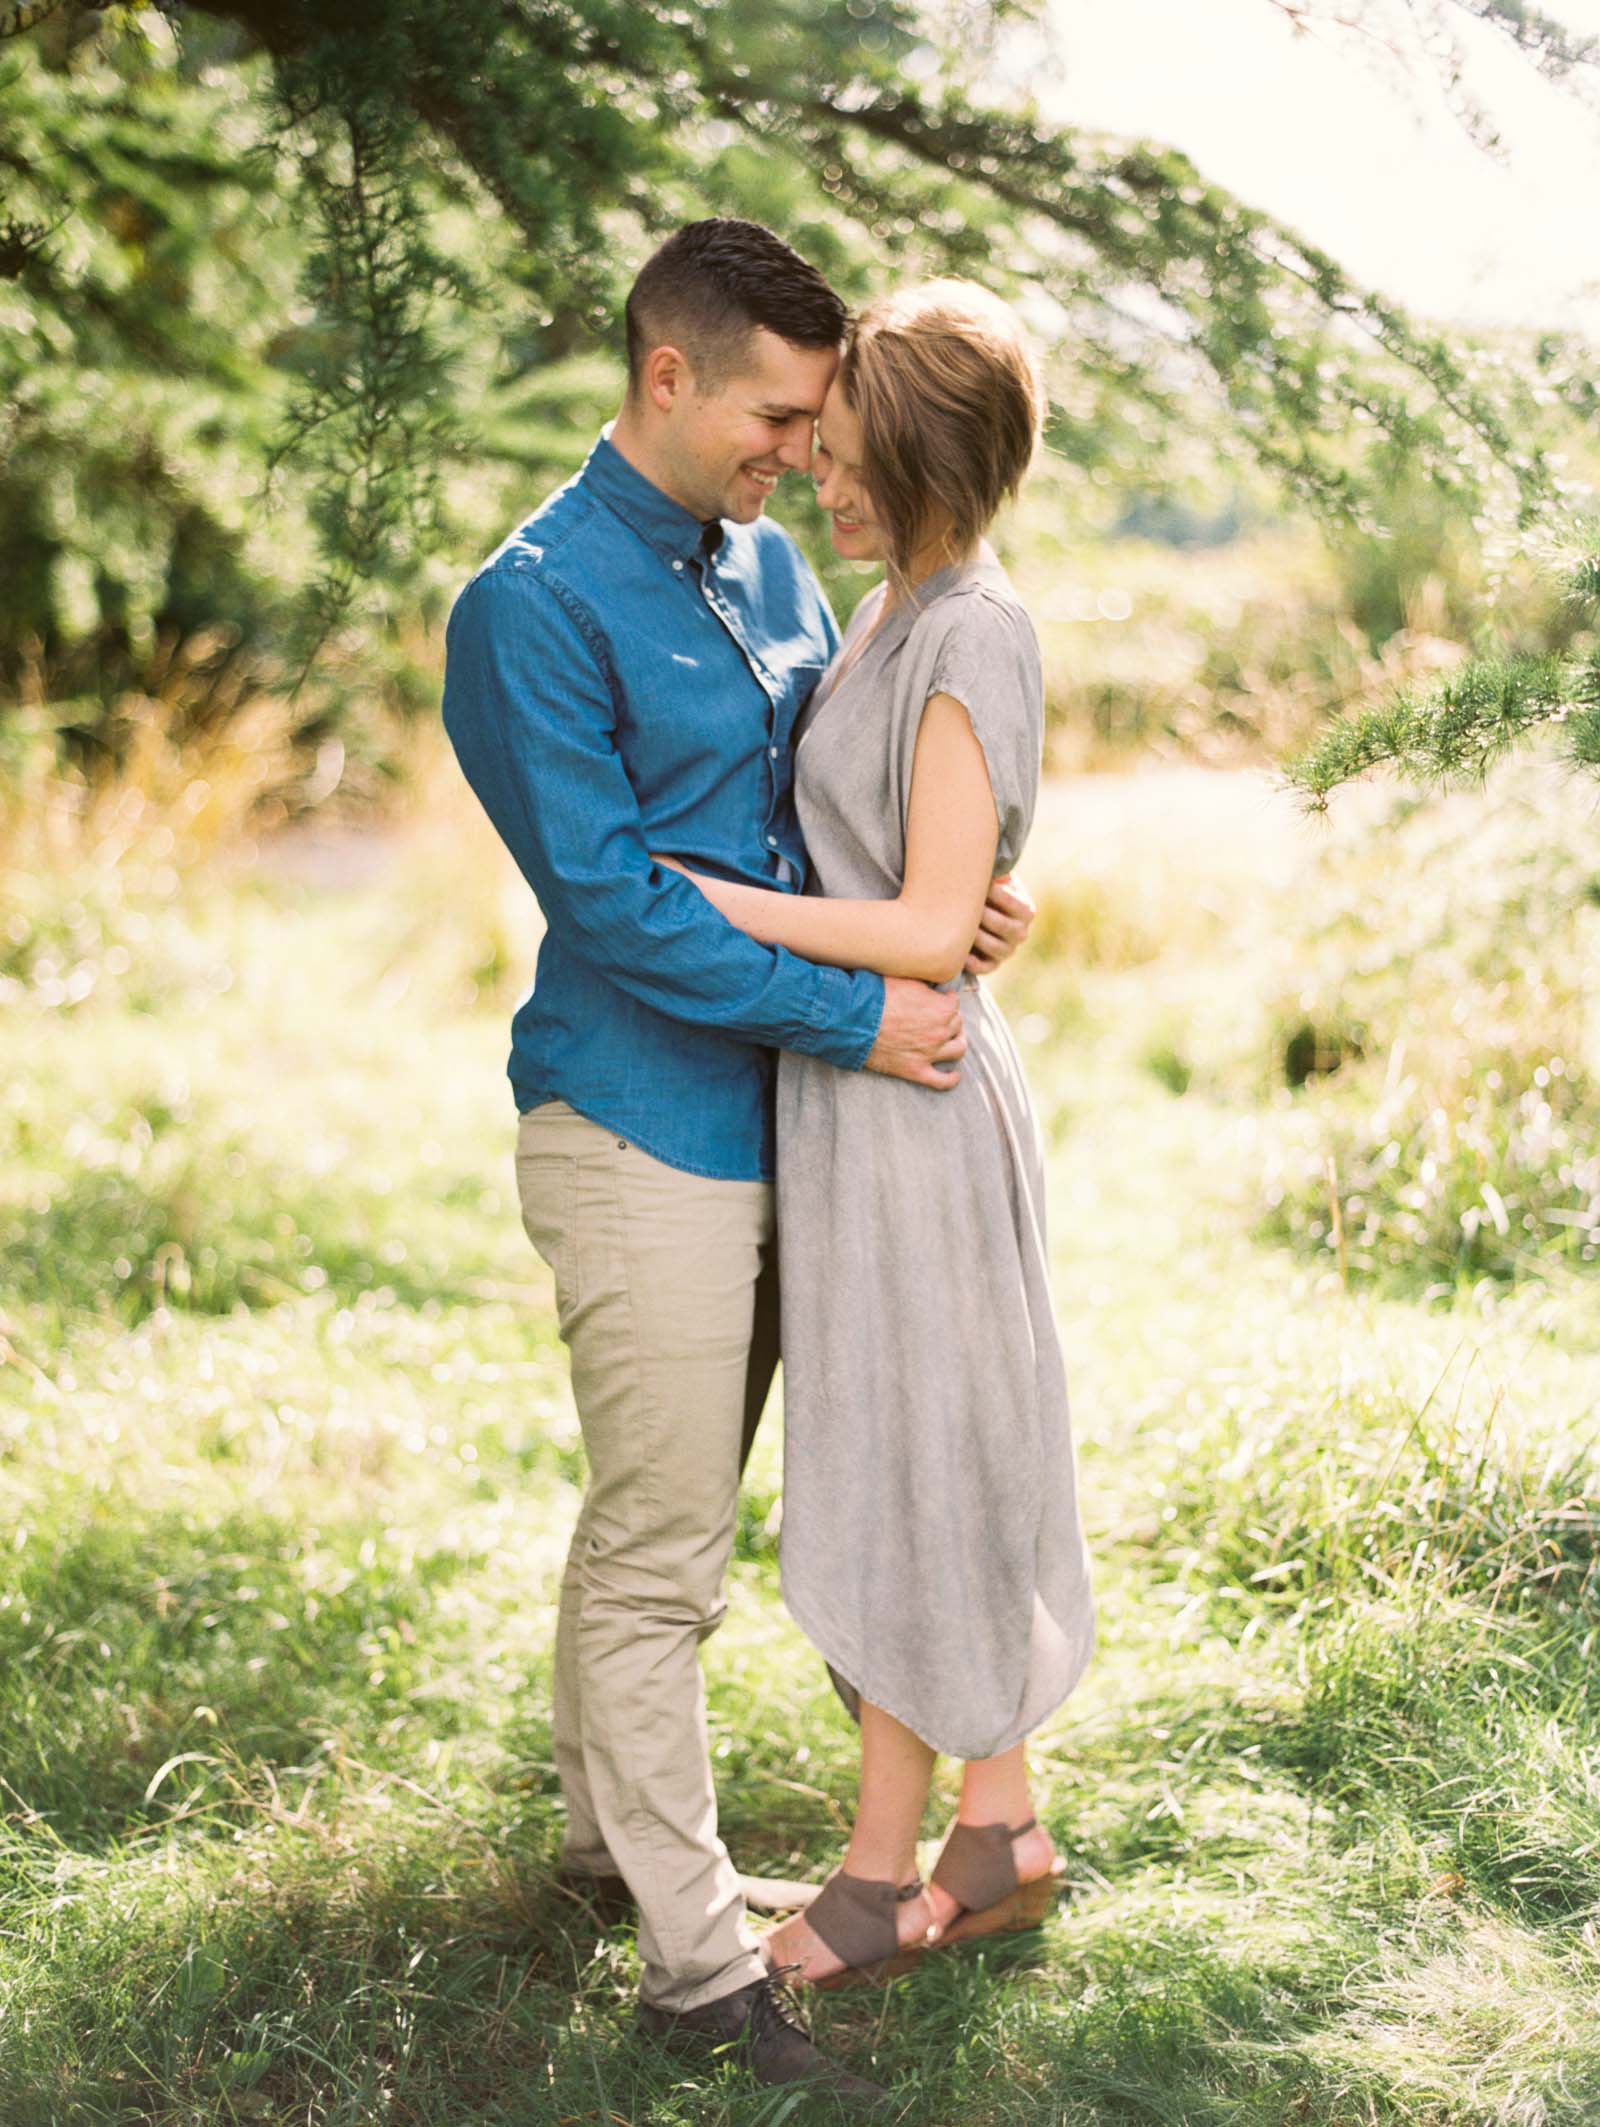 A romantic embrace at discovery park captured on film by top Seattle Engagement Photographer Anna Peters